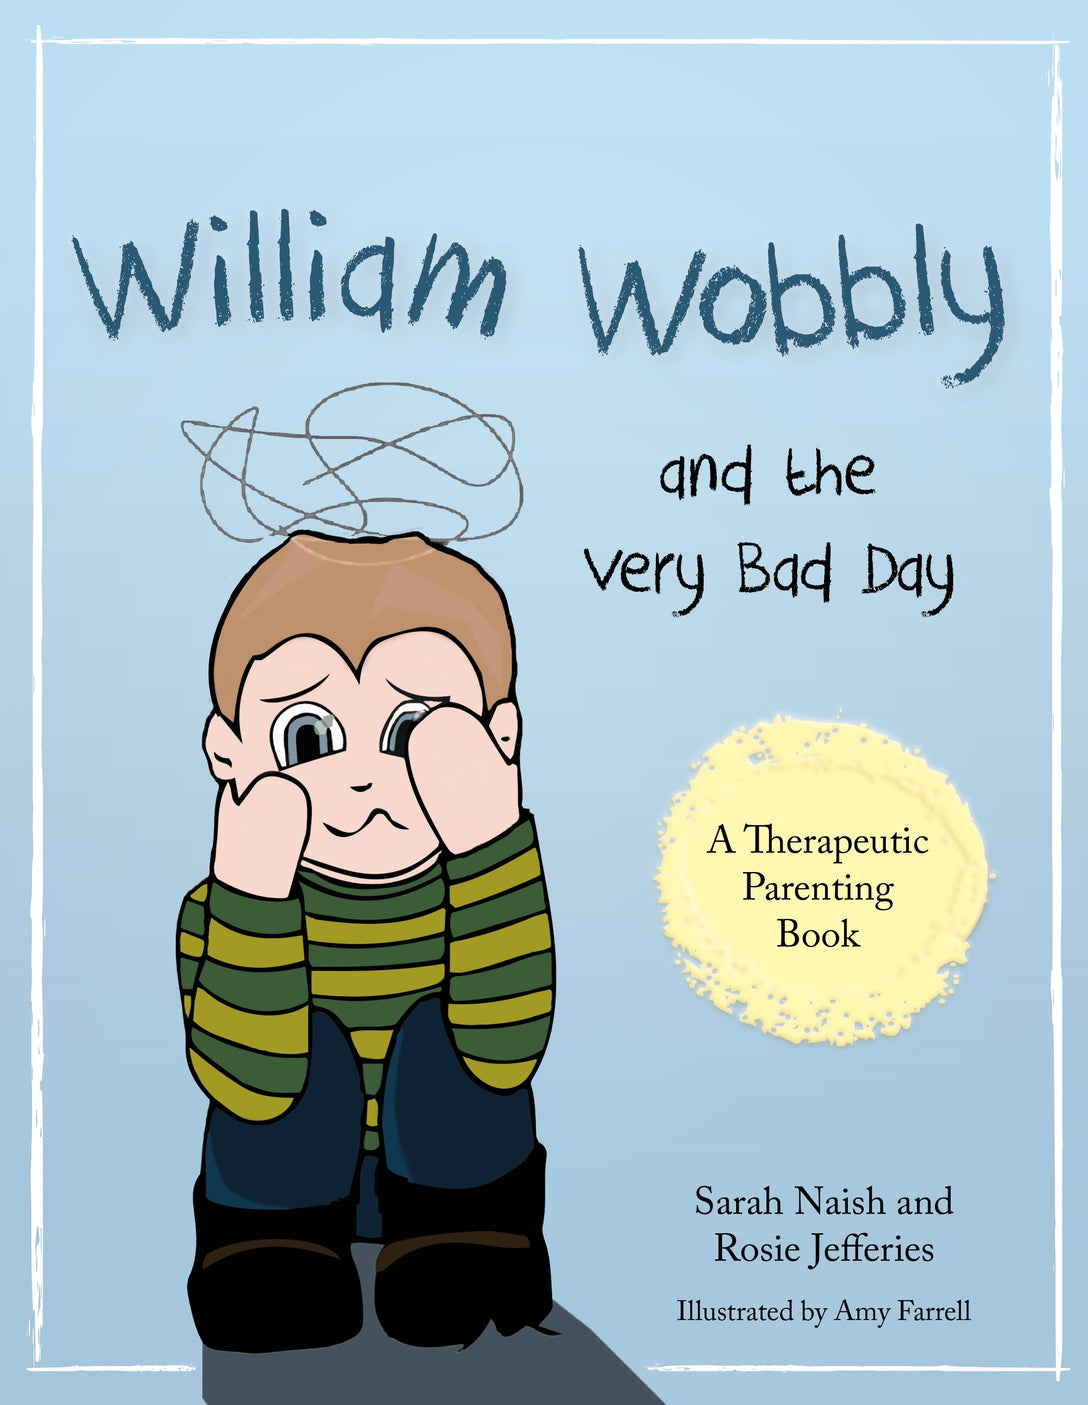 William Wobbly and the Very Bad Day by Sarah Naish, Rosie Jefferies, Amy Farrell